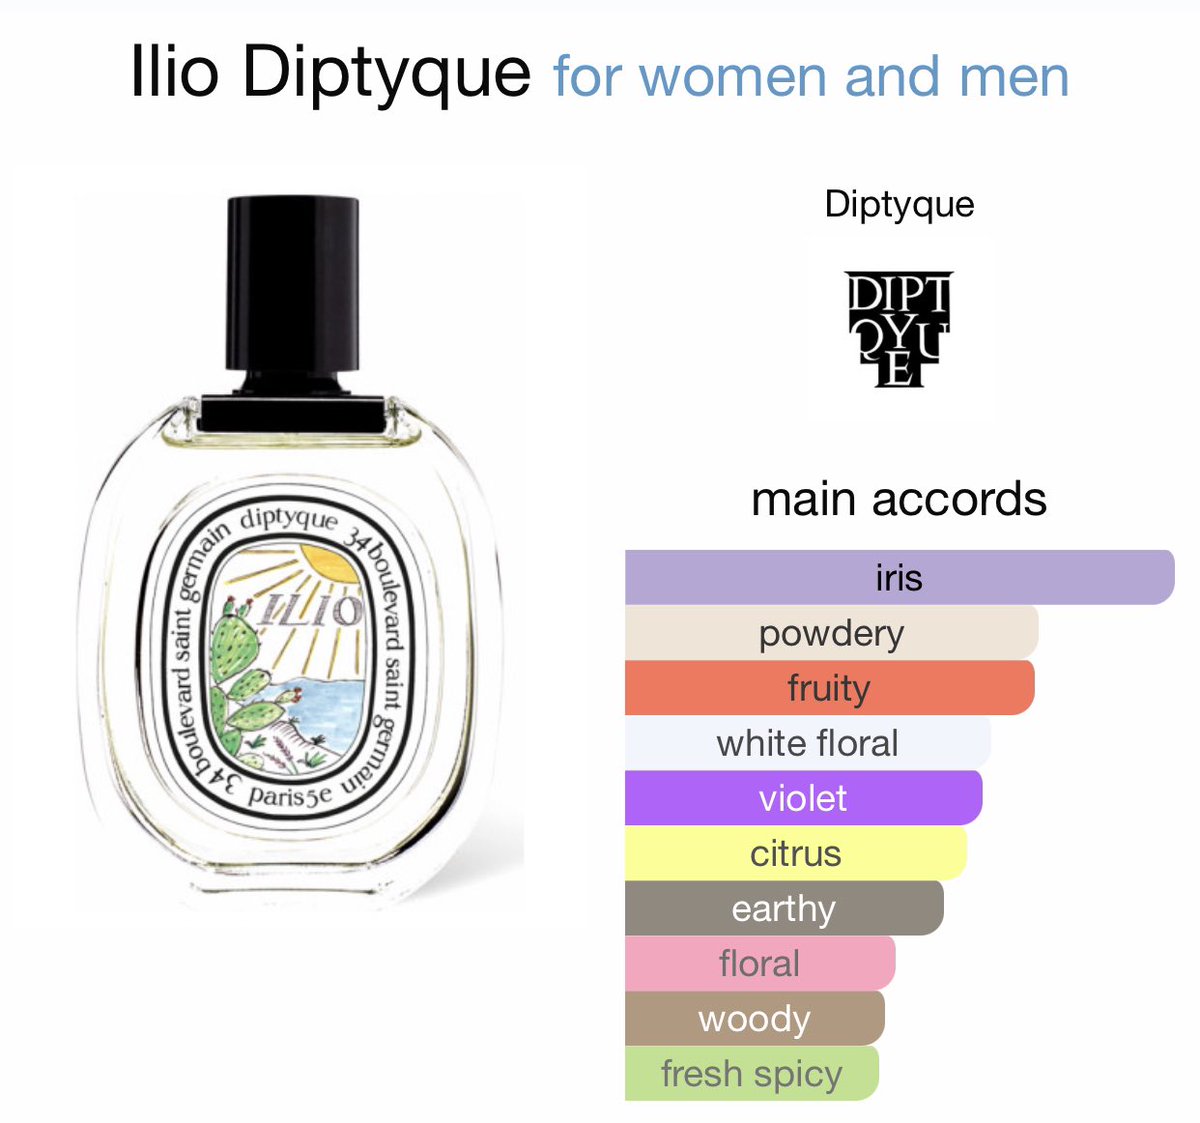 Haechan's new perfumes (from 🫧) 

Eau Capitale + Ilio Diptyque
Both are unisex perfumes ~

Very summery ~~~ 
손민수 하자~~~